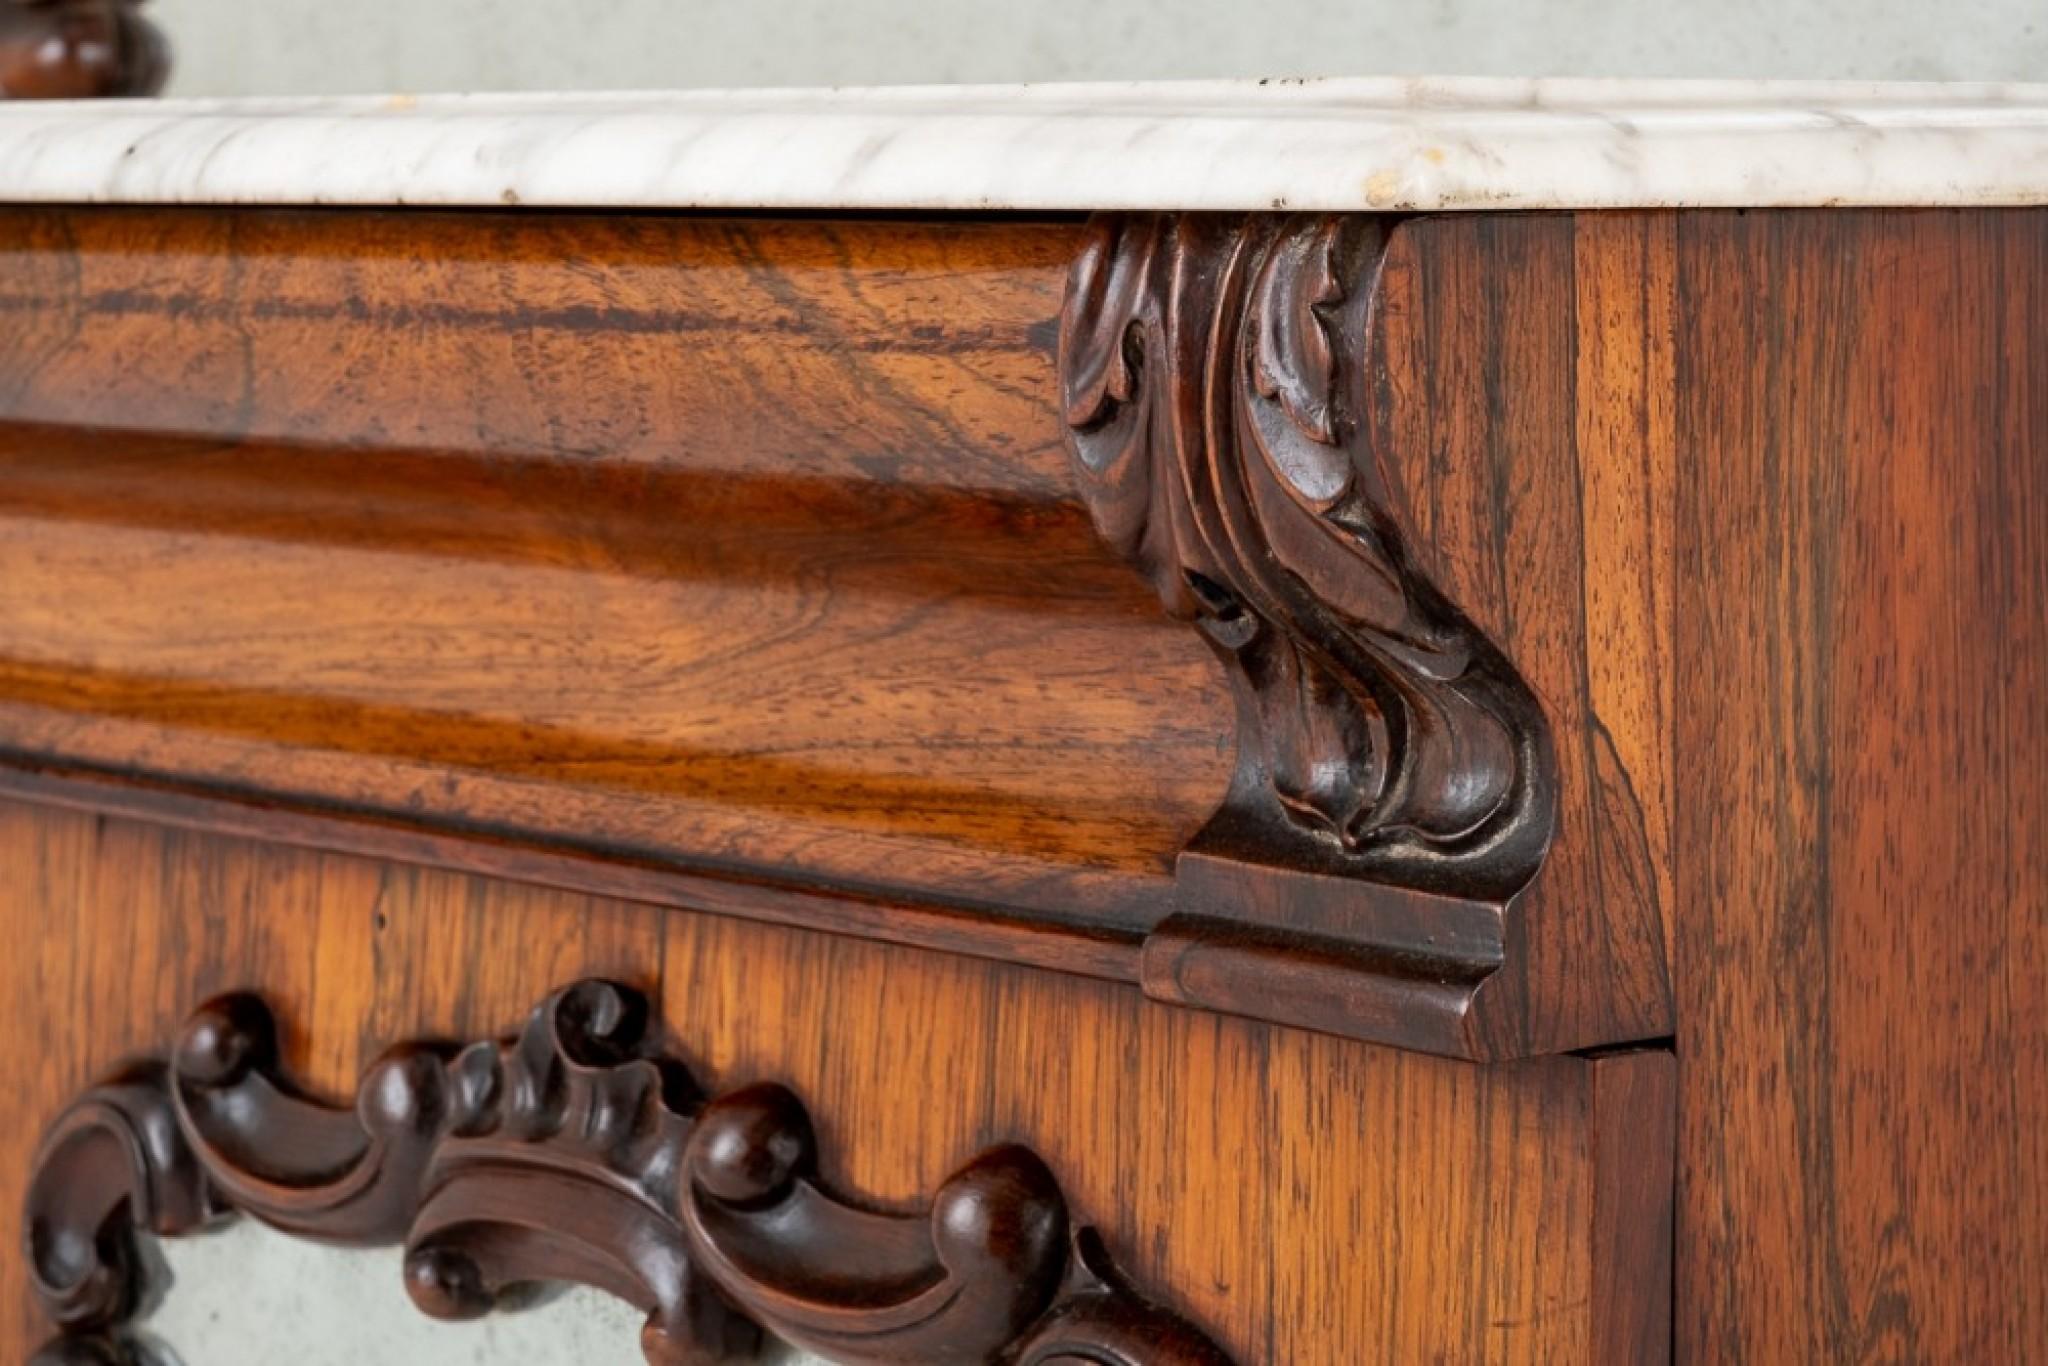 Rosewood marble top chiffonier.
Standing upon a plinth base.
circa 1860
The lower doors being of a mirrored form with carved decorations.
The doors open to reveal 1 interior shelf.
Above the doors there is a mahogany lined shaped drawer.
The